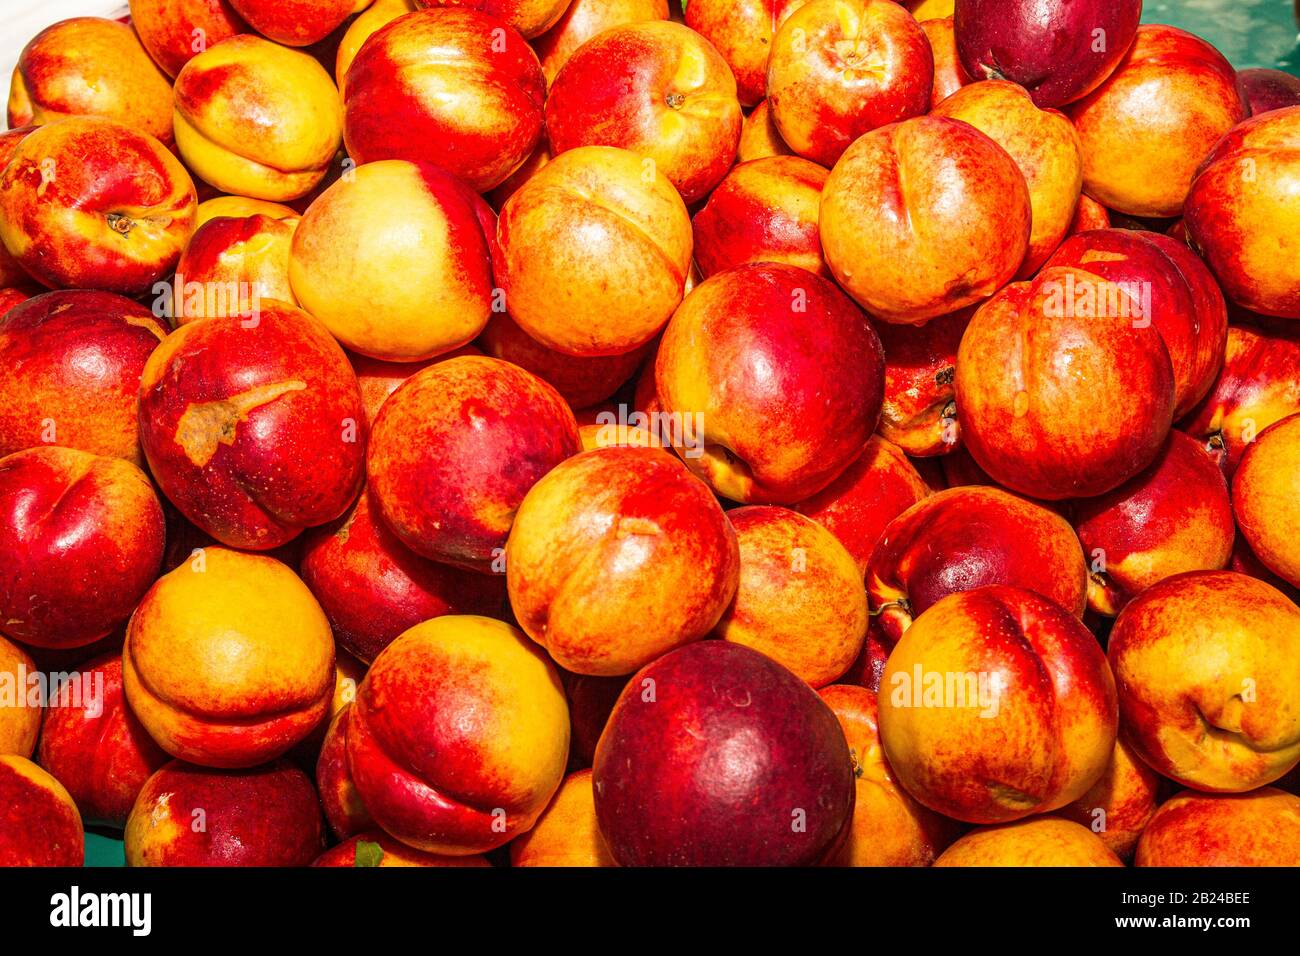 High energy antioxidant food, health booster juicy neactarines super fruit on sale at local fruit market. Nutrition healthcare concept. Stock Photo